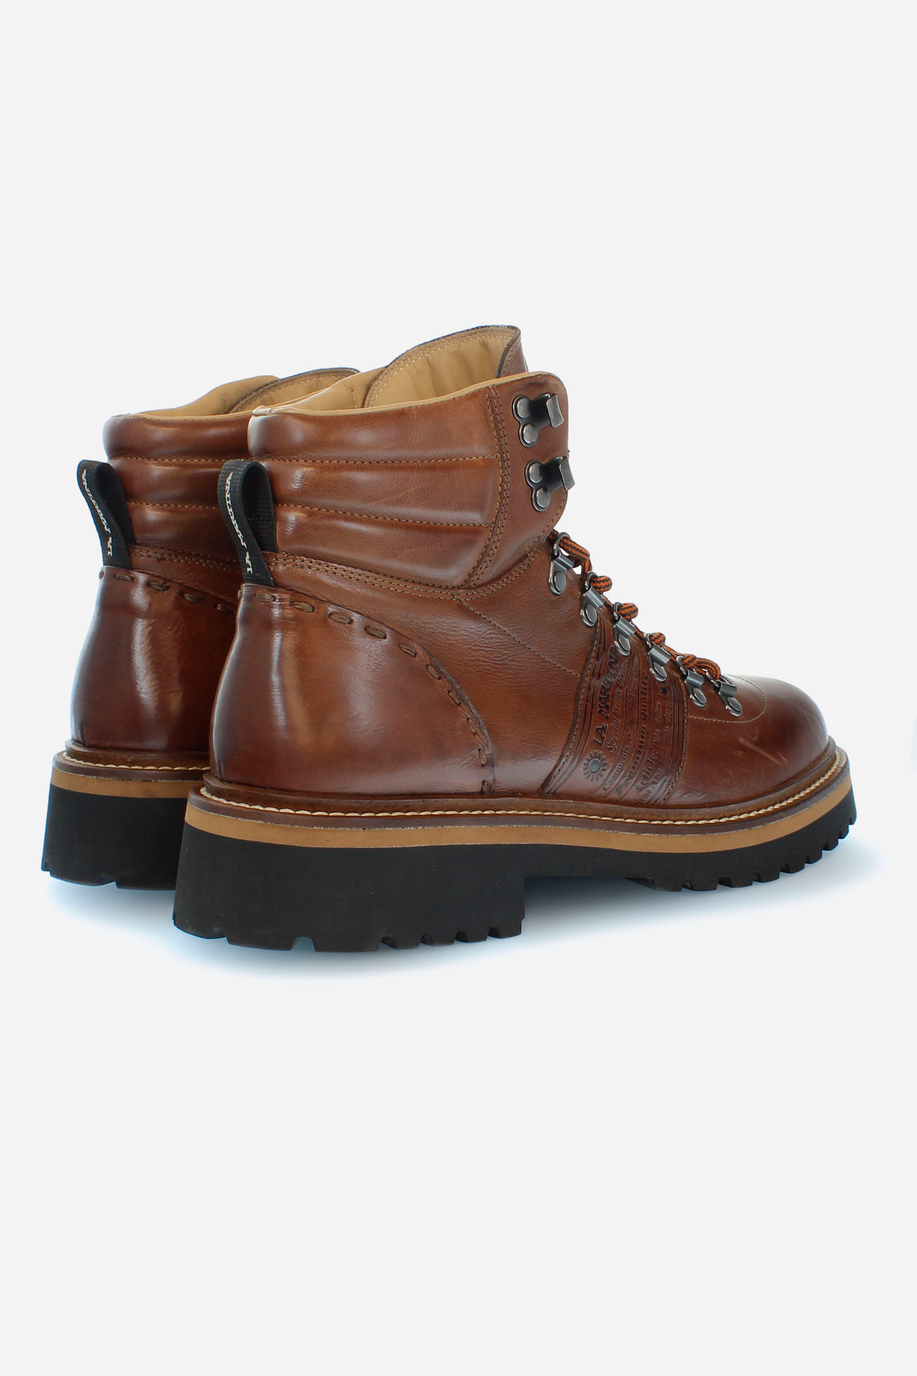 Men's urban style ankle boot in leather - New Arrivals Men | La Martina - Official Online Shop